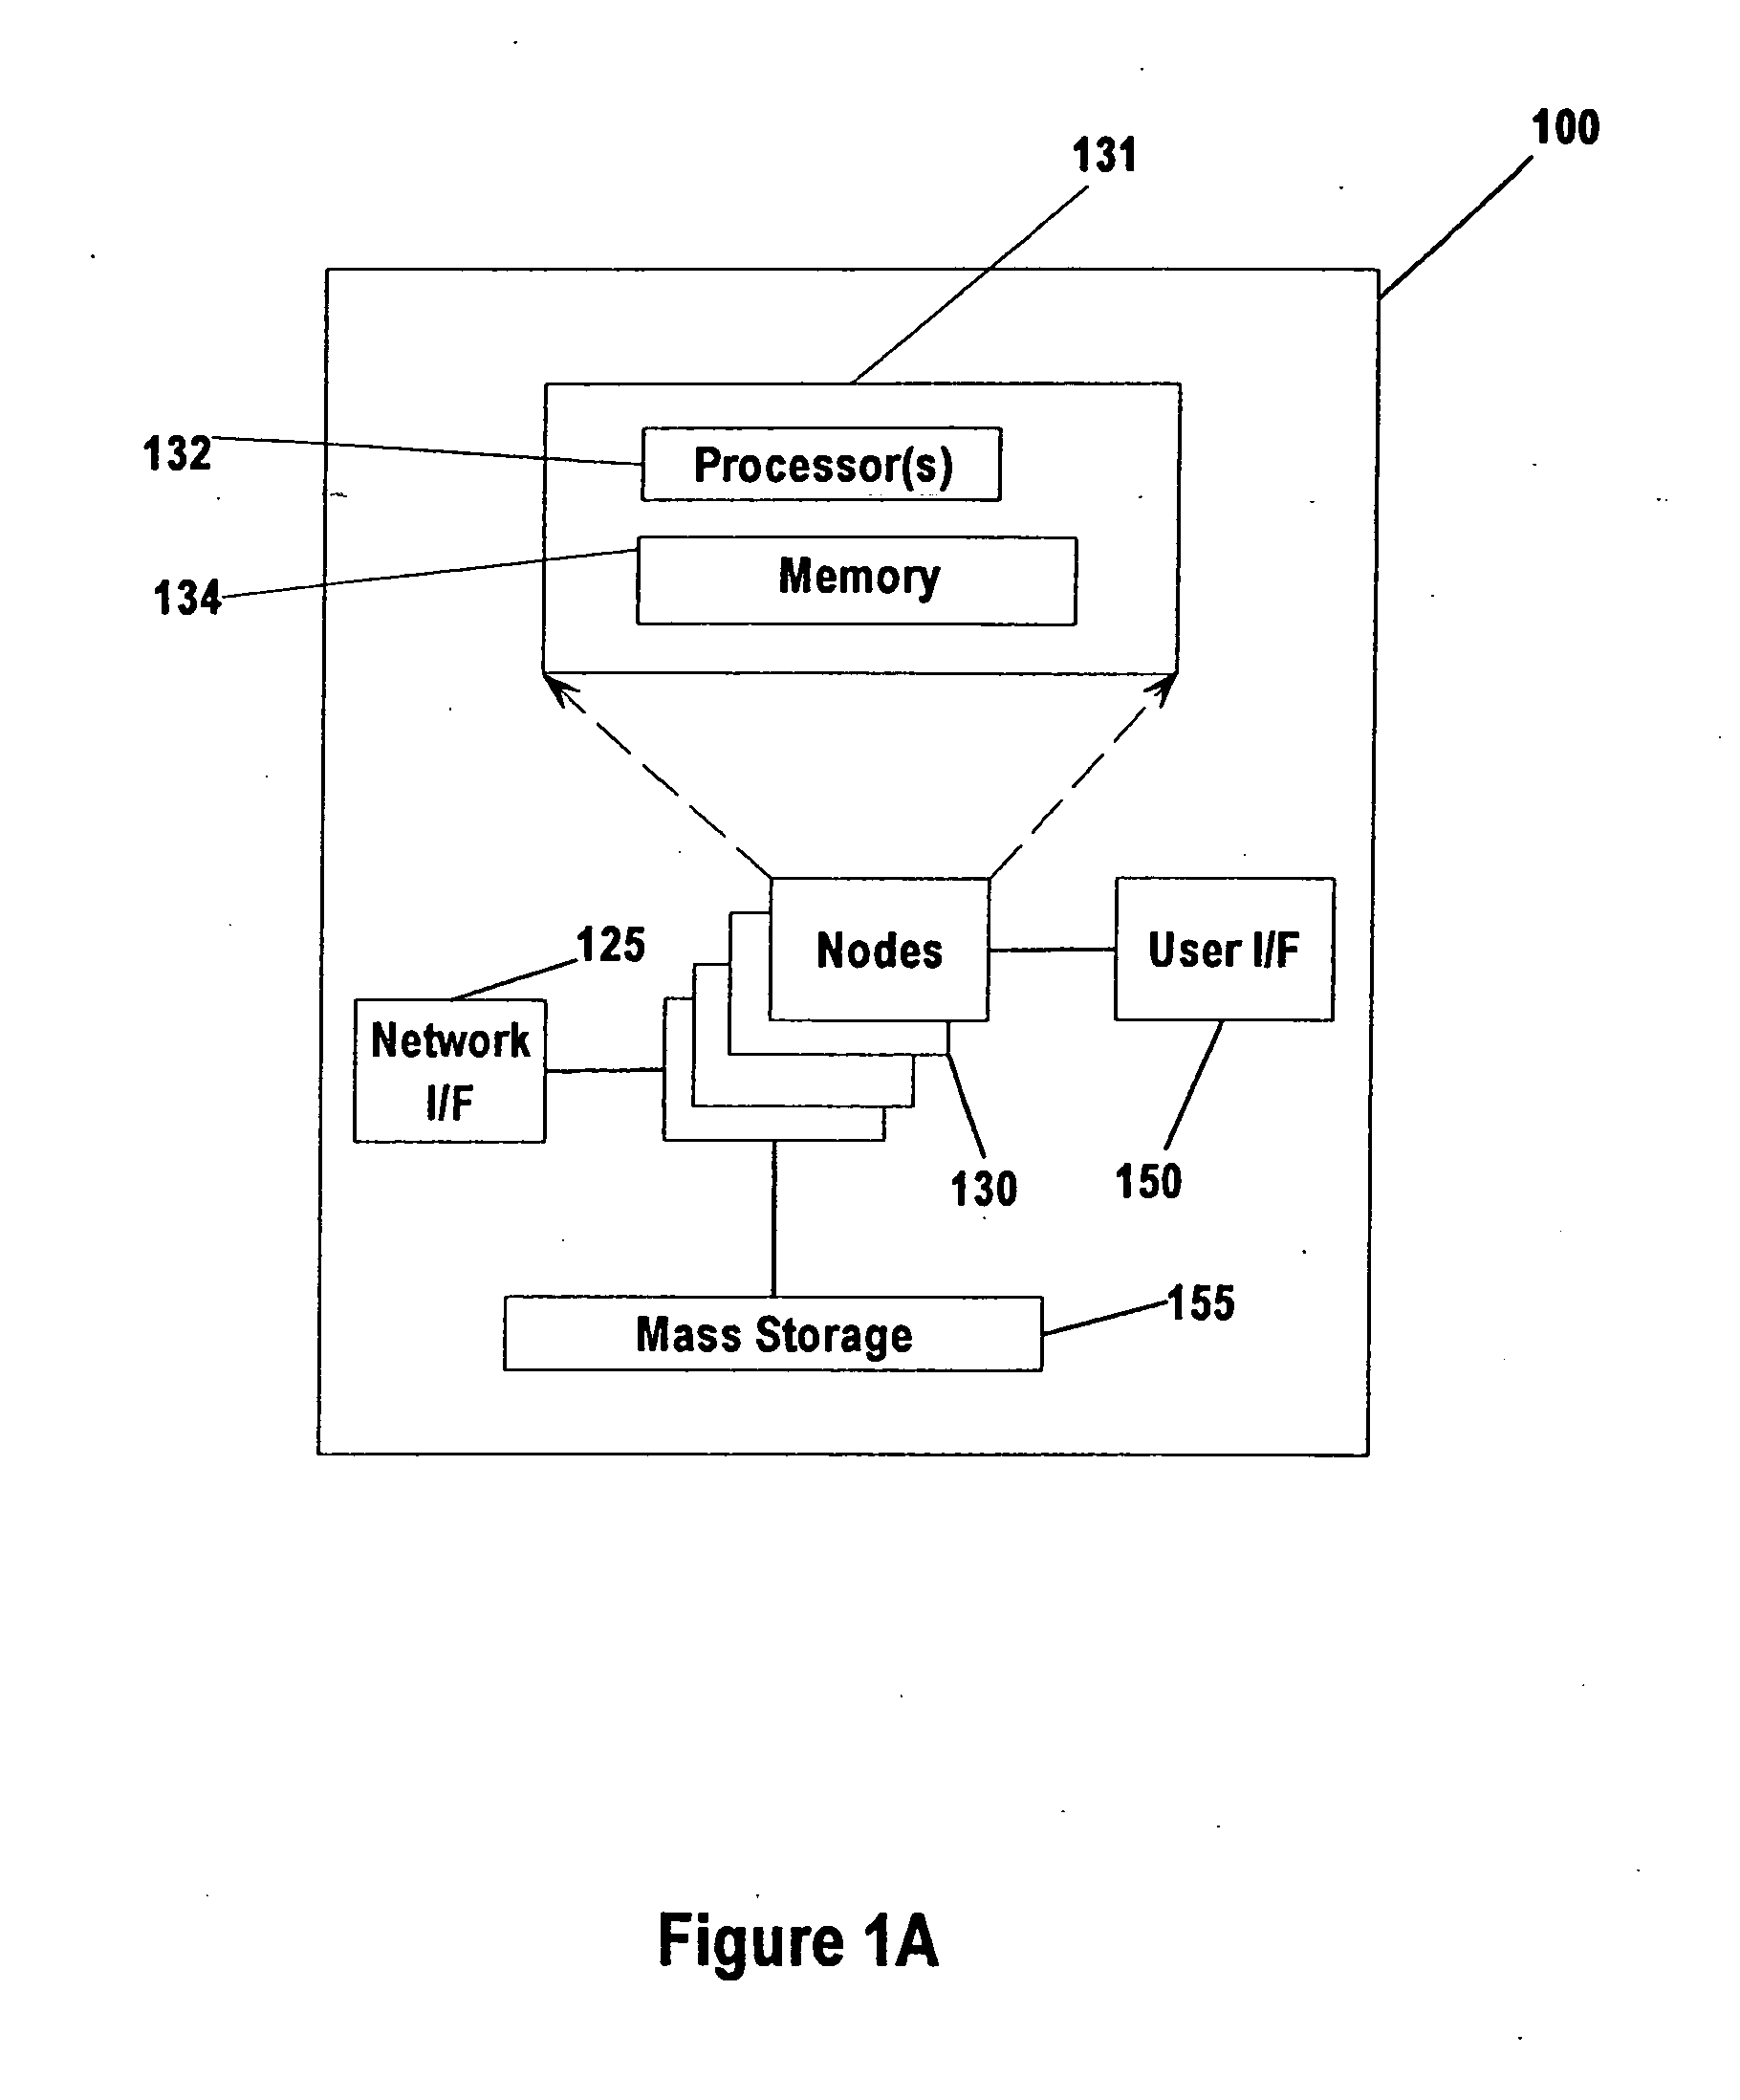 Mechanism for enabling the distribution of operating system resources in a multi-node computer system